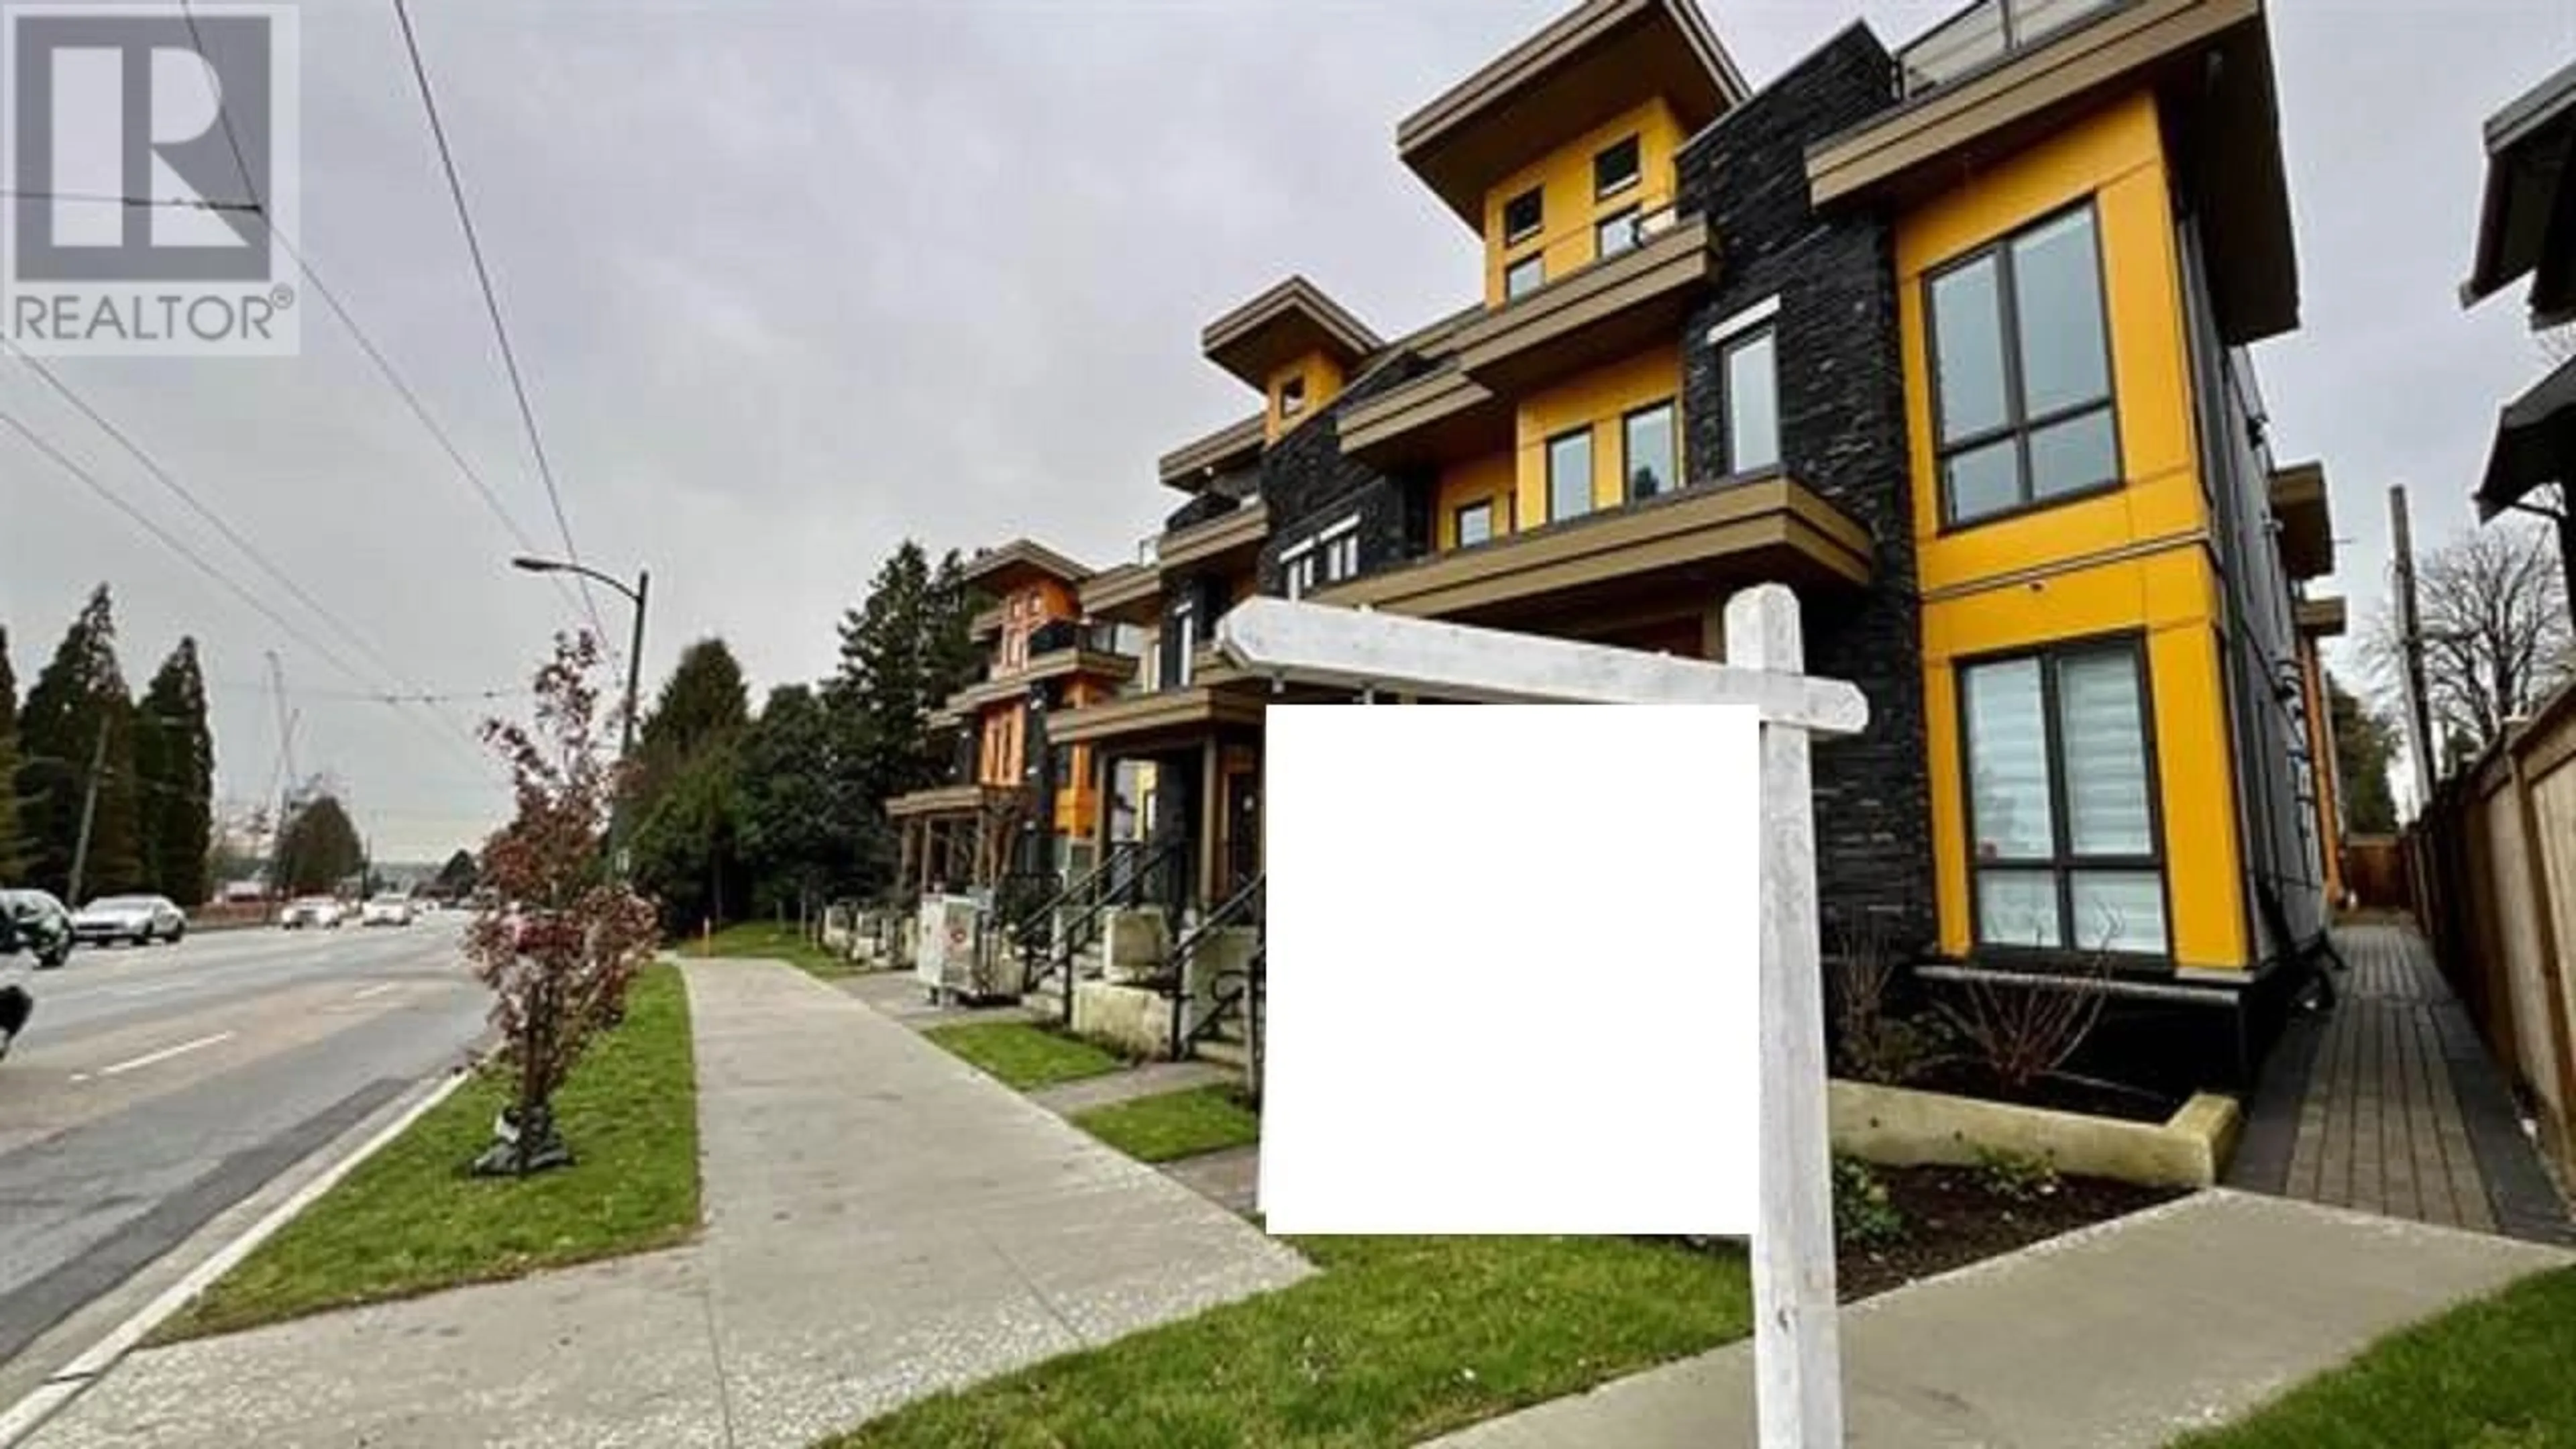 A pic from exterior of the house or condo for 12 7563 OAK STREET, Vancouver British Columbia V6P4A4